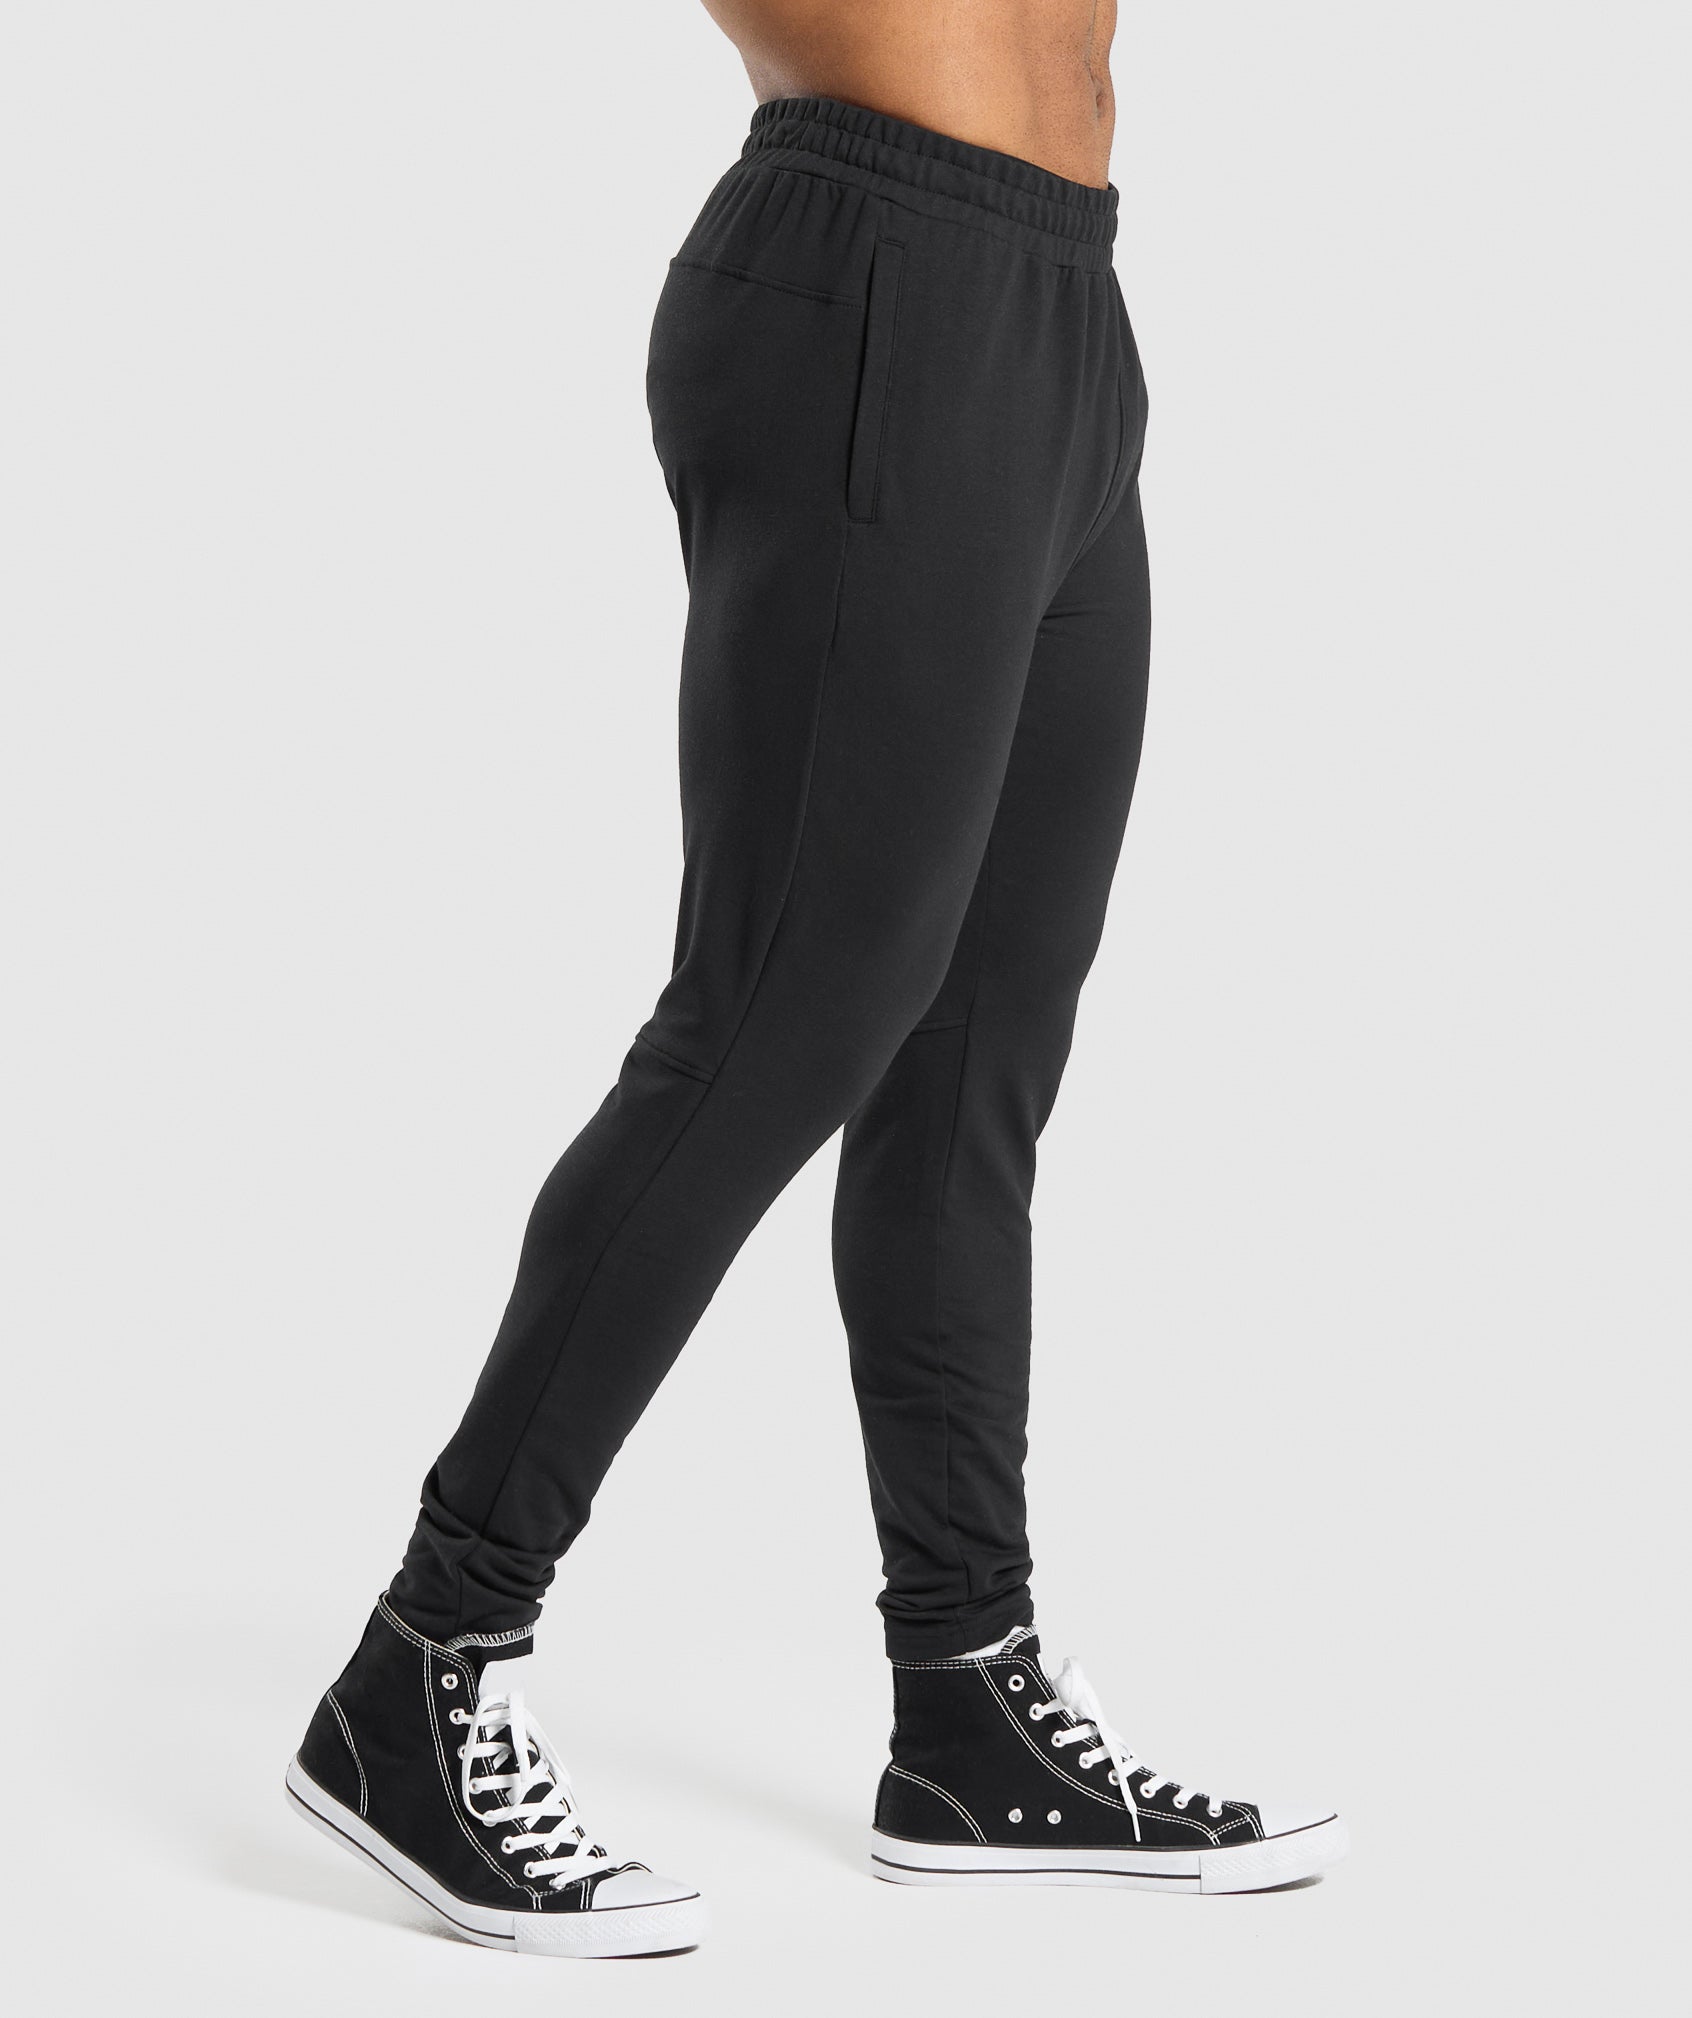 Essential Muscle Joggers in Black - view 3